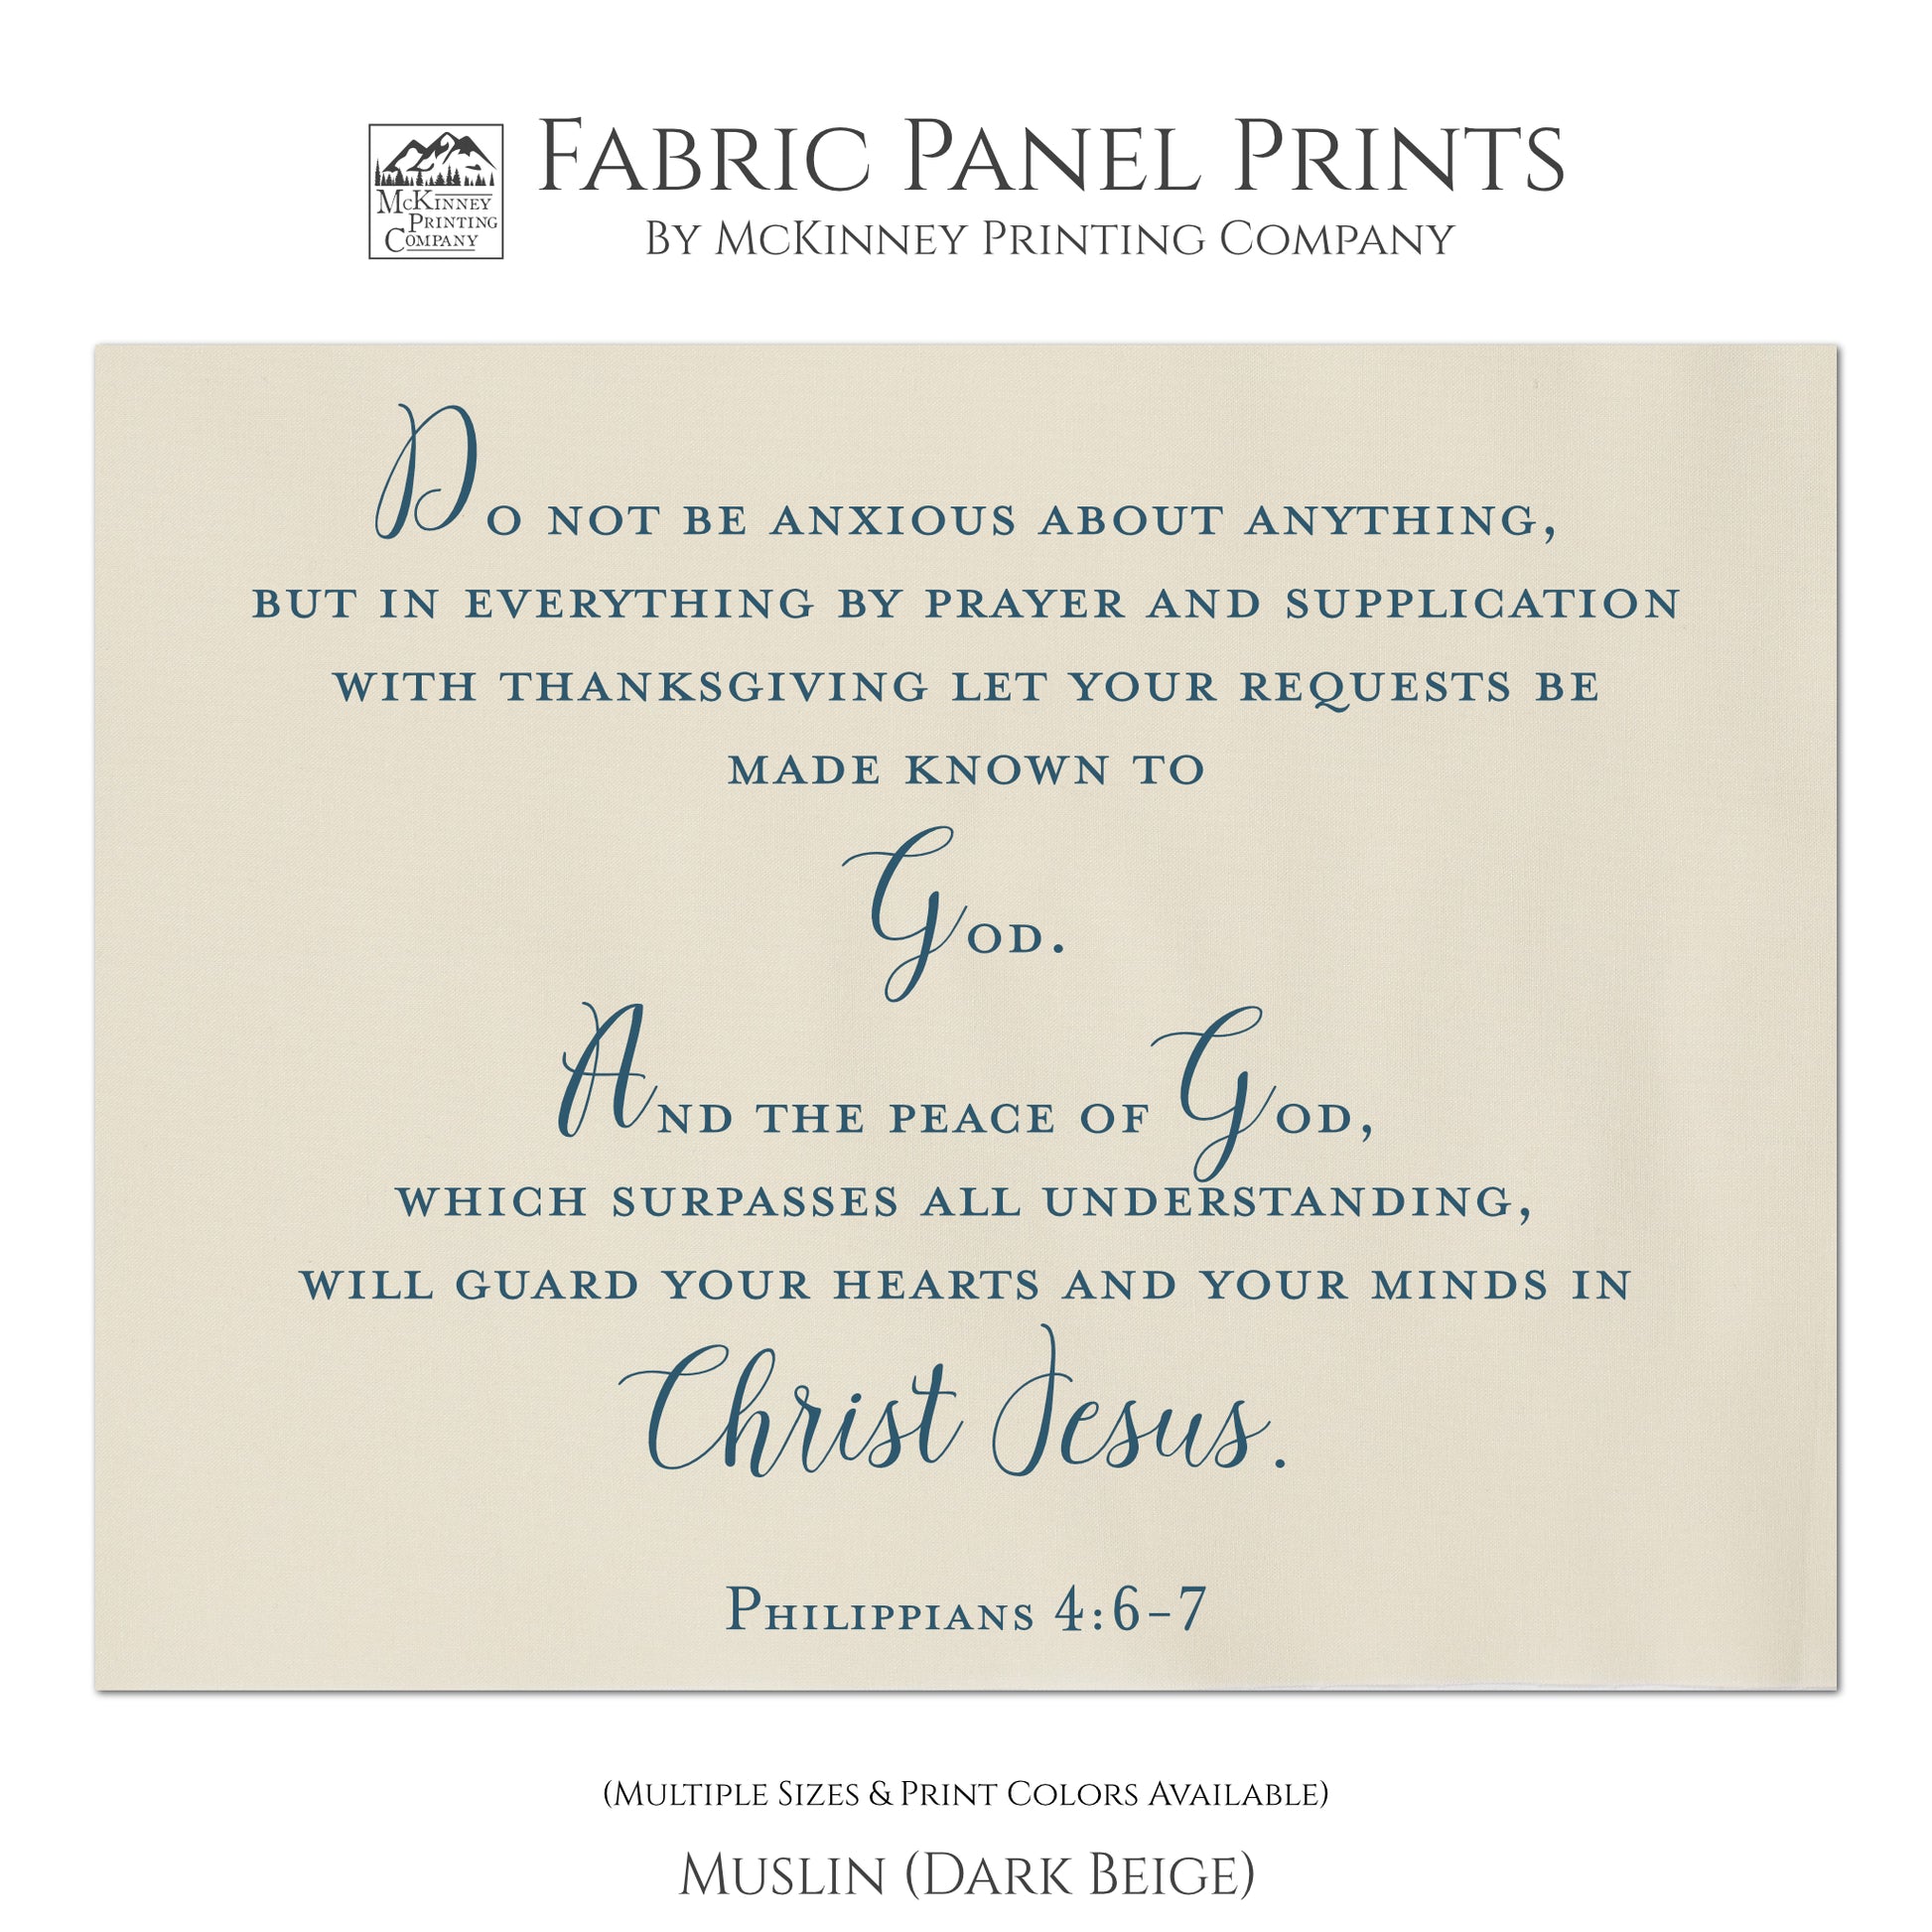 Do not be anxious about anything, but in everything by prayer and supplication with thanksgiving let your requests be made known to God. And the peace of God, which surpasses all understanding, will guard your hearts and your minds in Christ Jesus. Philippians 4:6-7, Bible Verse Fabric, Wall Art, Quilt Block, Fabric Panel Print - Muslin